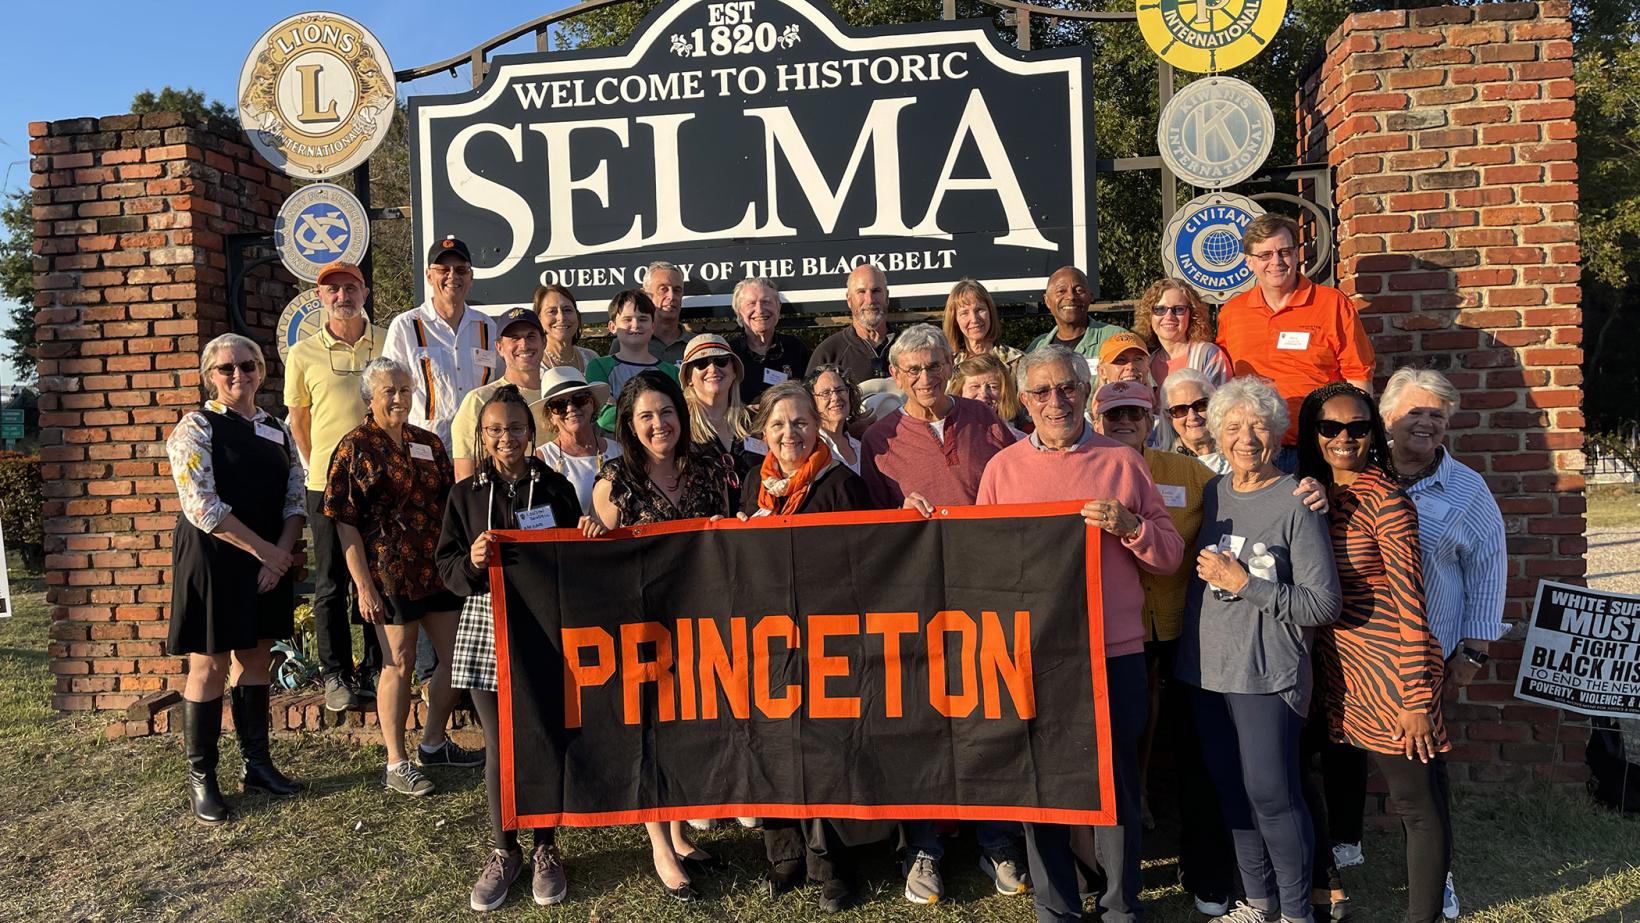 Princeton alumni and friends pose with a Princeton banner in front of a welcome sign to Selma, Alabama